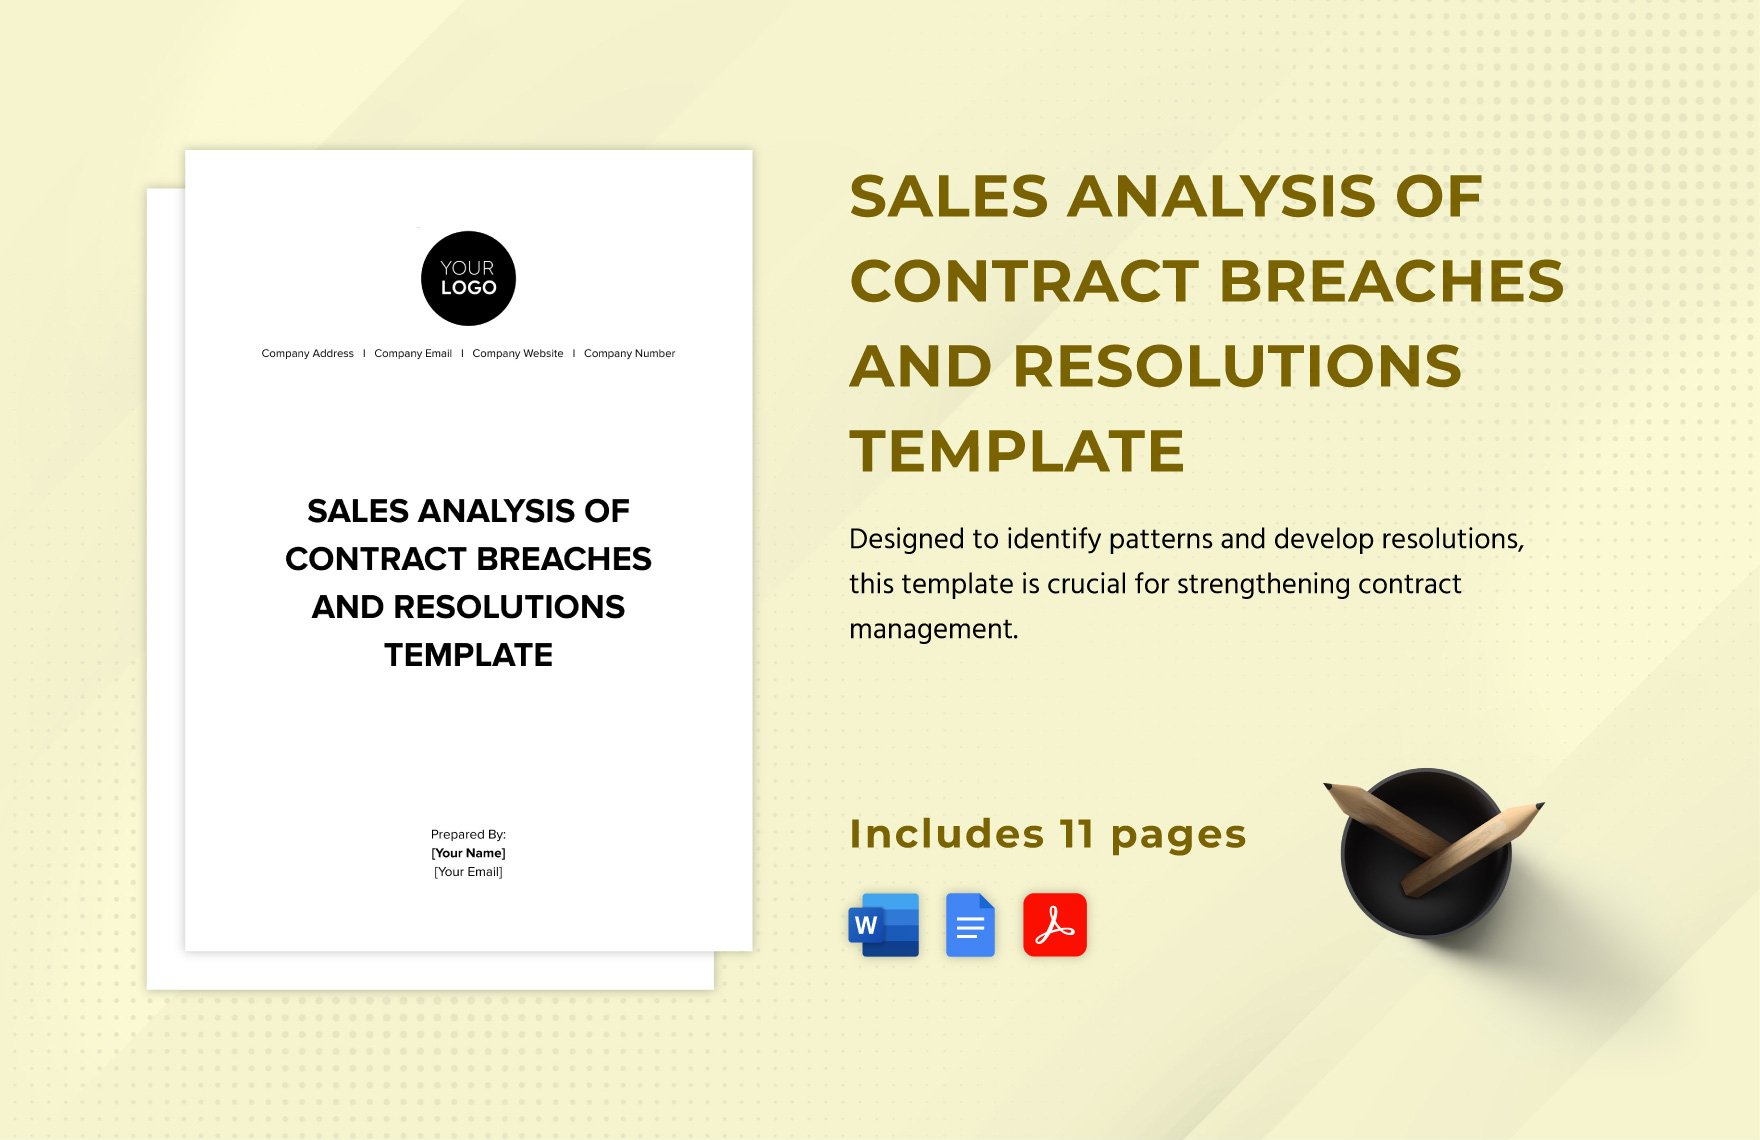 Sales Analysis of Contract Breaches and Resolutions Template